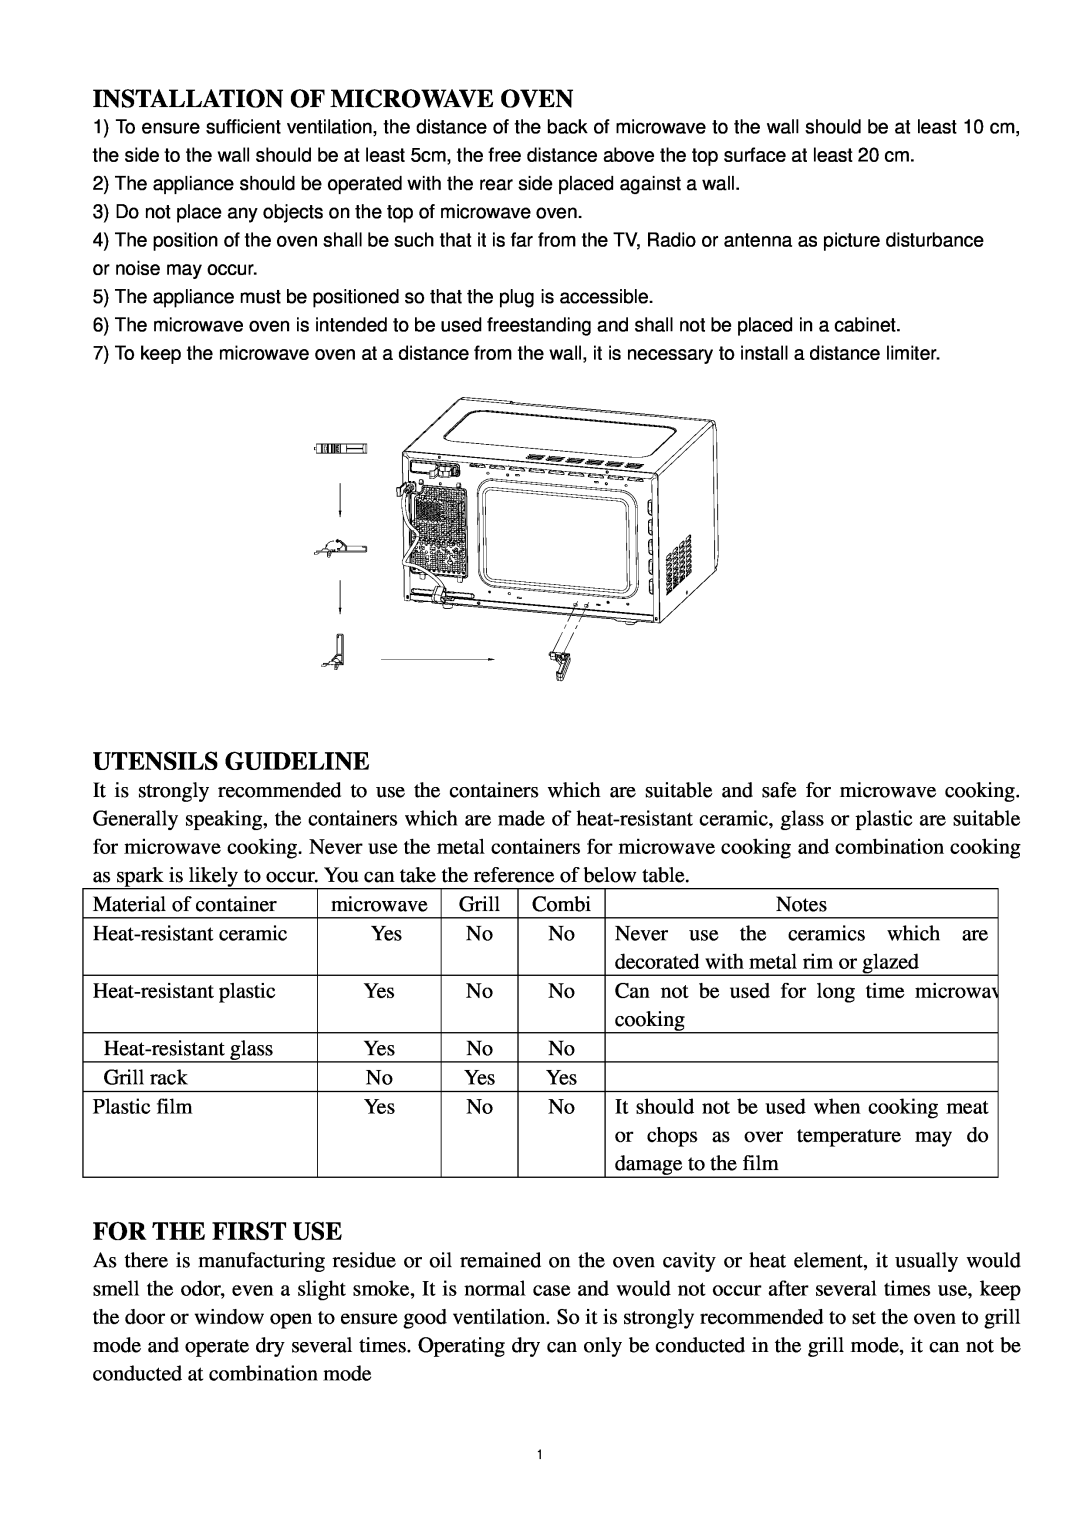 Haier HDN-3090EGF, HDN-3090EGB, HDN-3090EGS manual Installation Of Microwave Oven, Utensils Guideline, For The First Use 